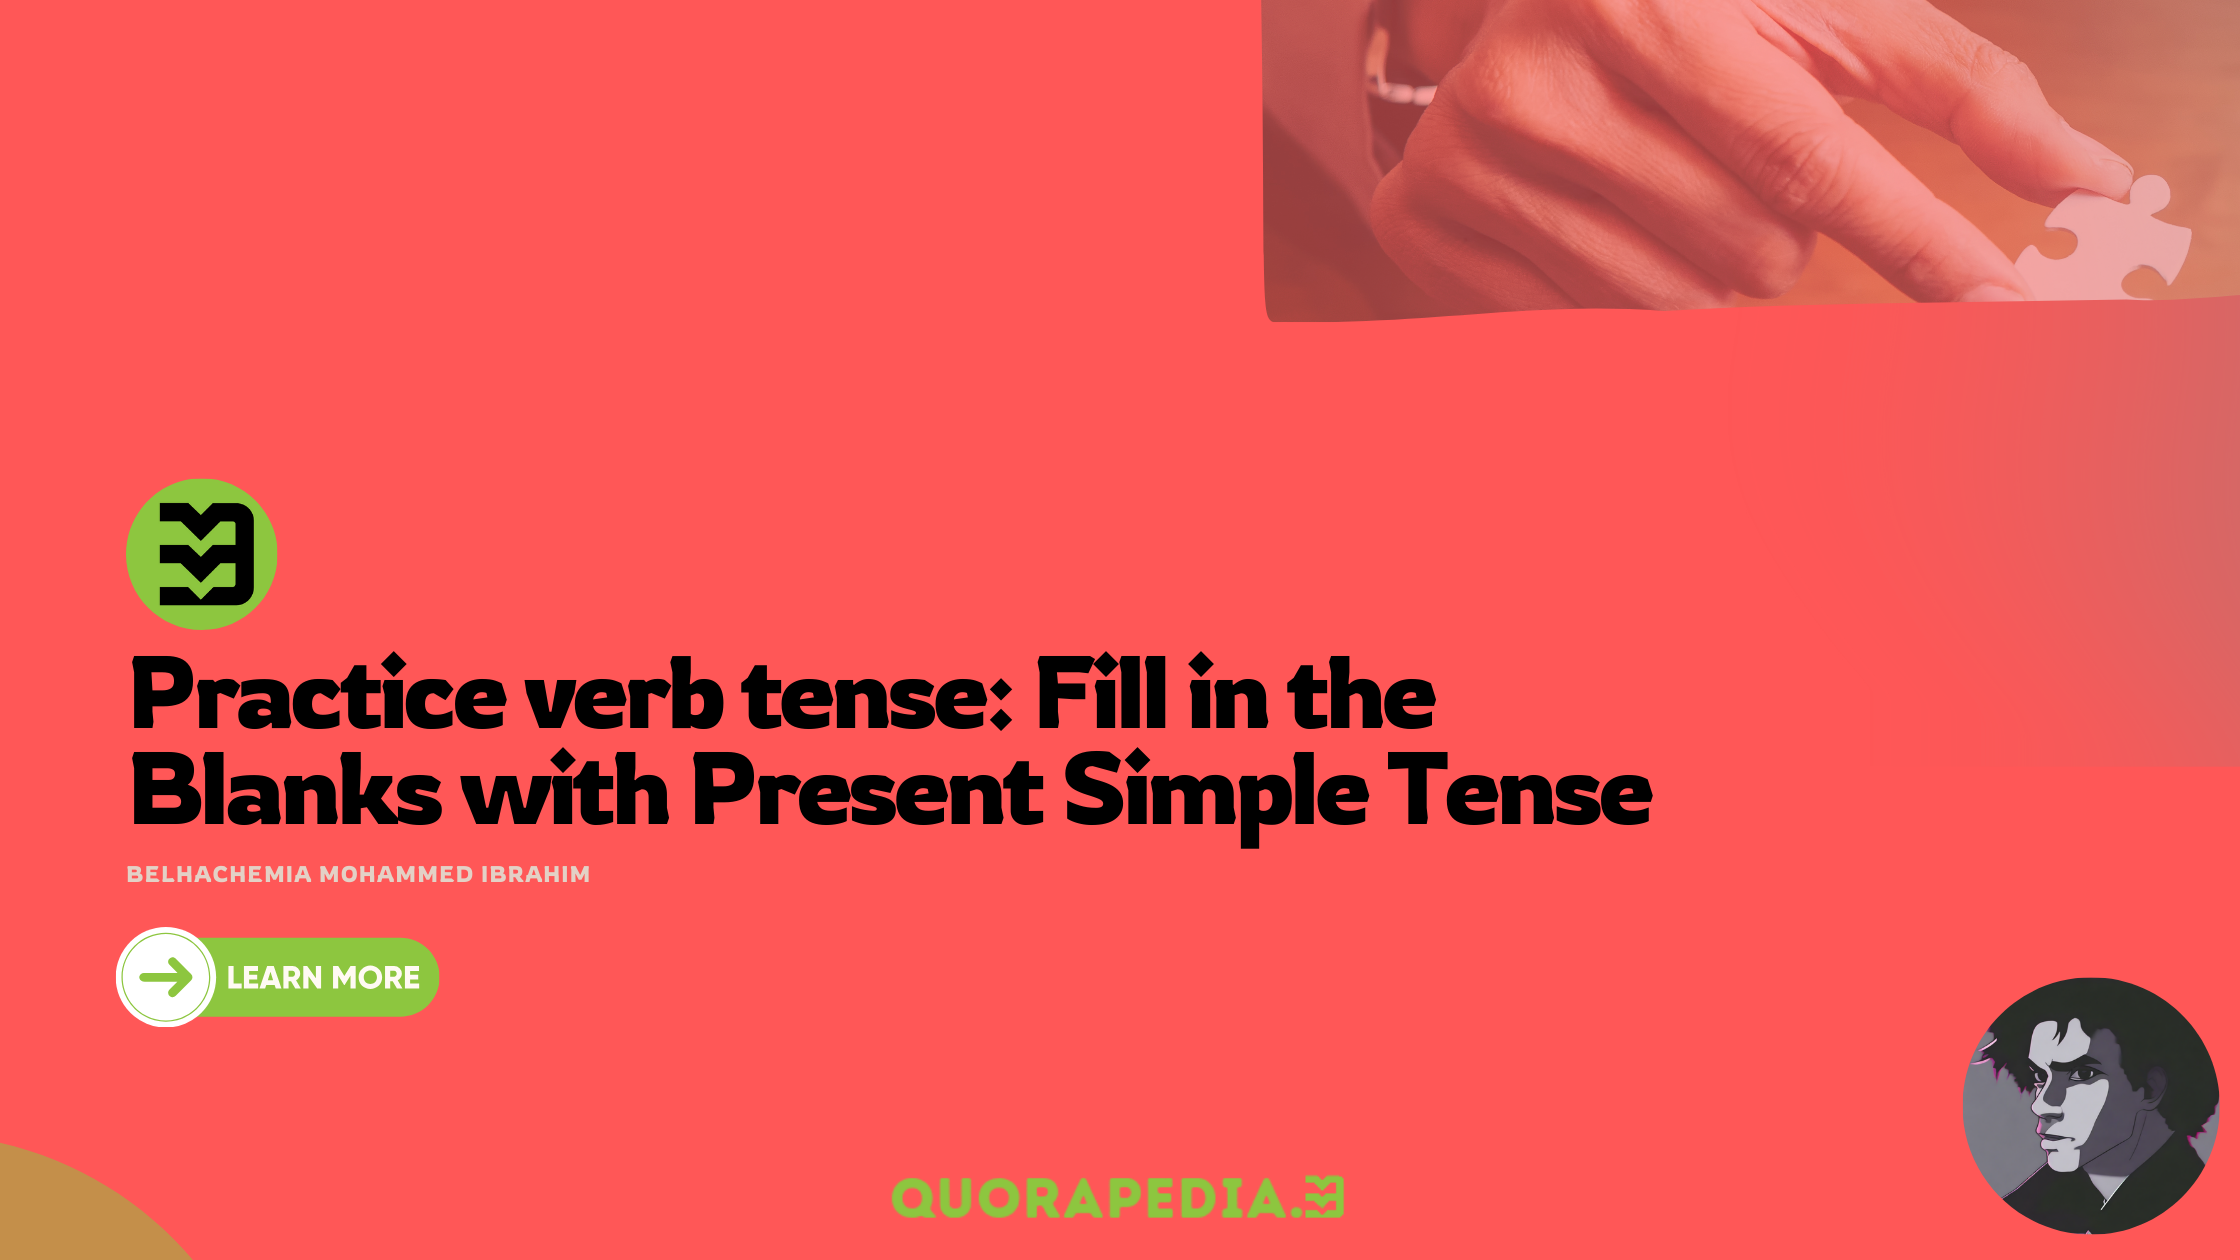 Practice verb tense: Fill in the Blanks with Present Simple Tense